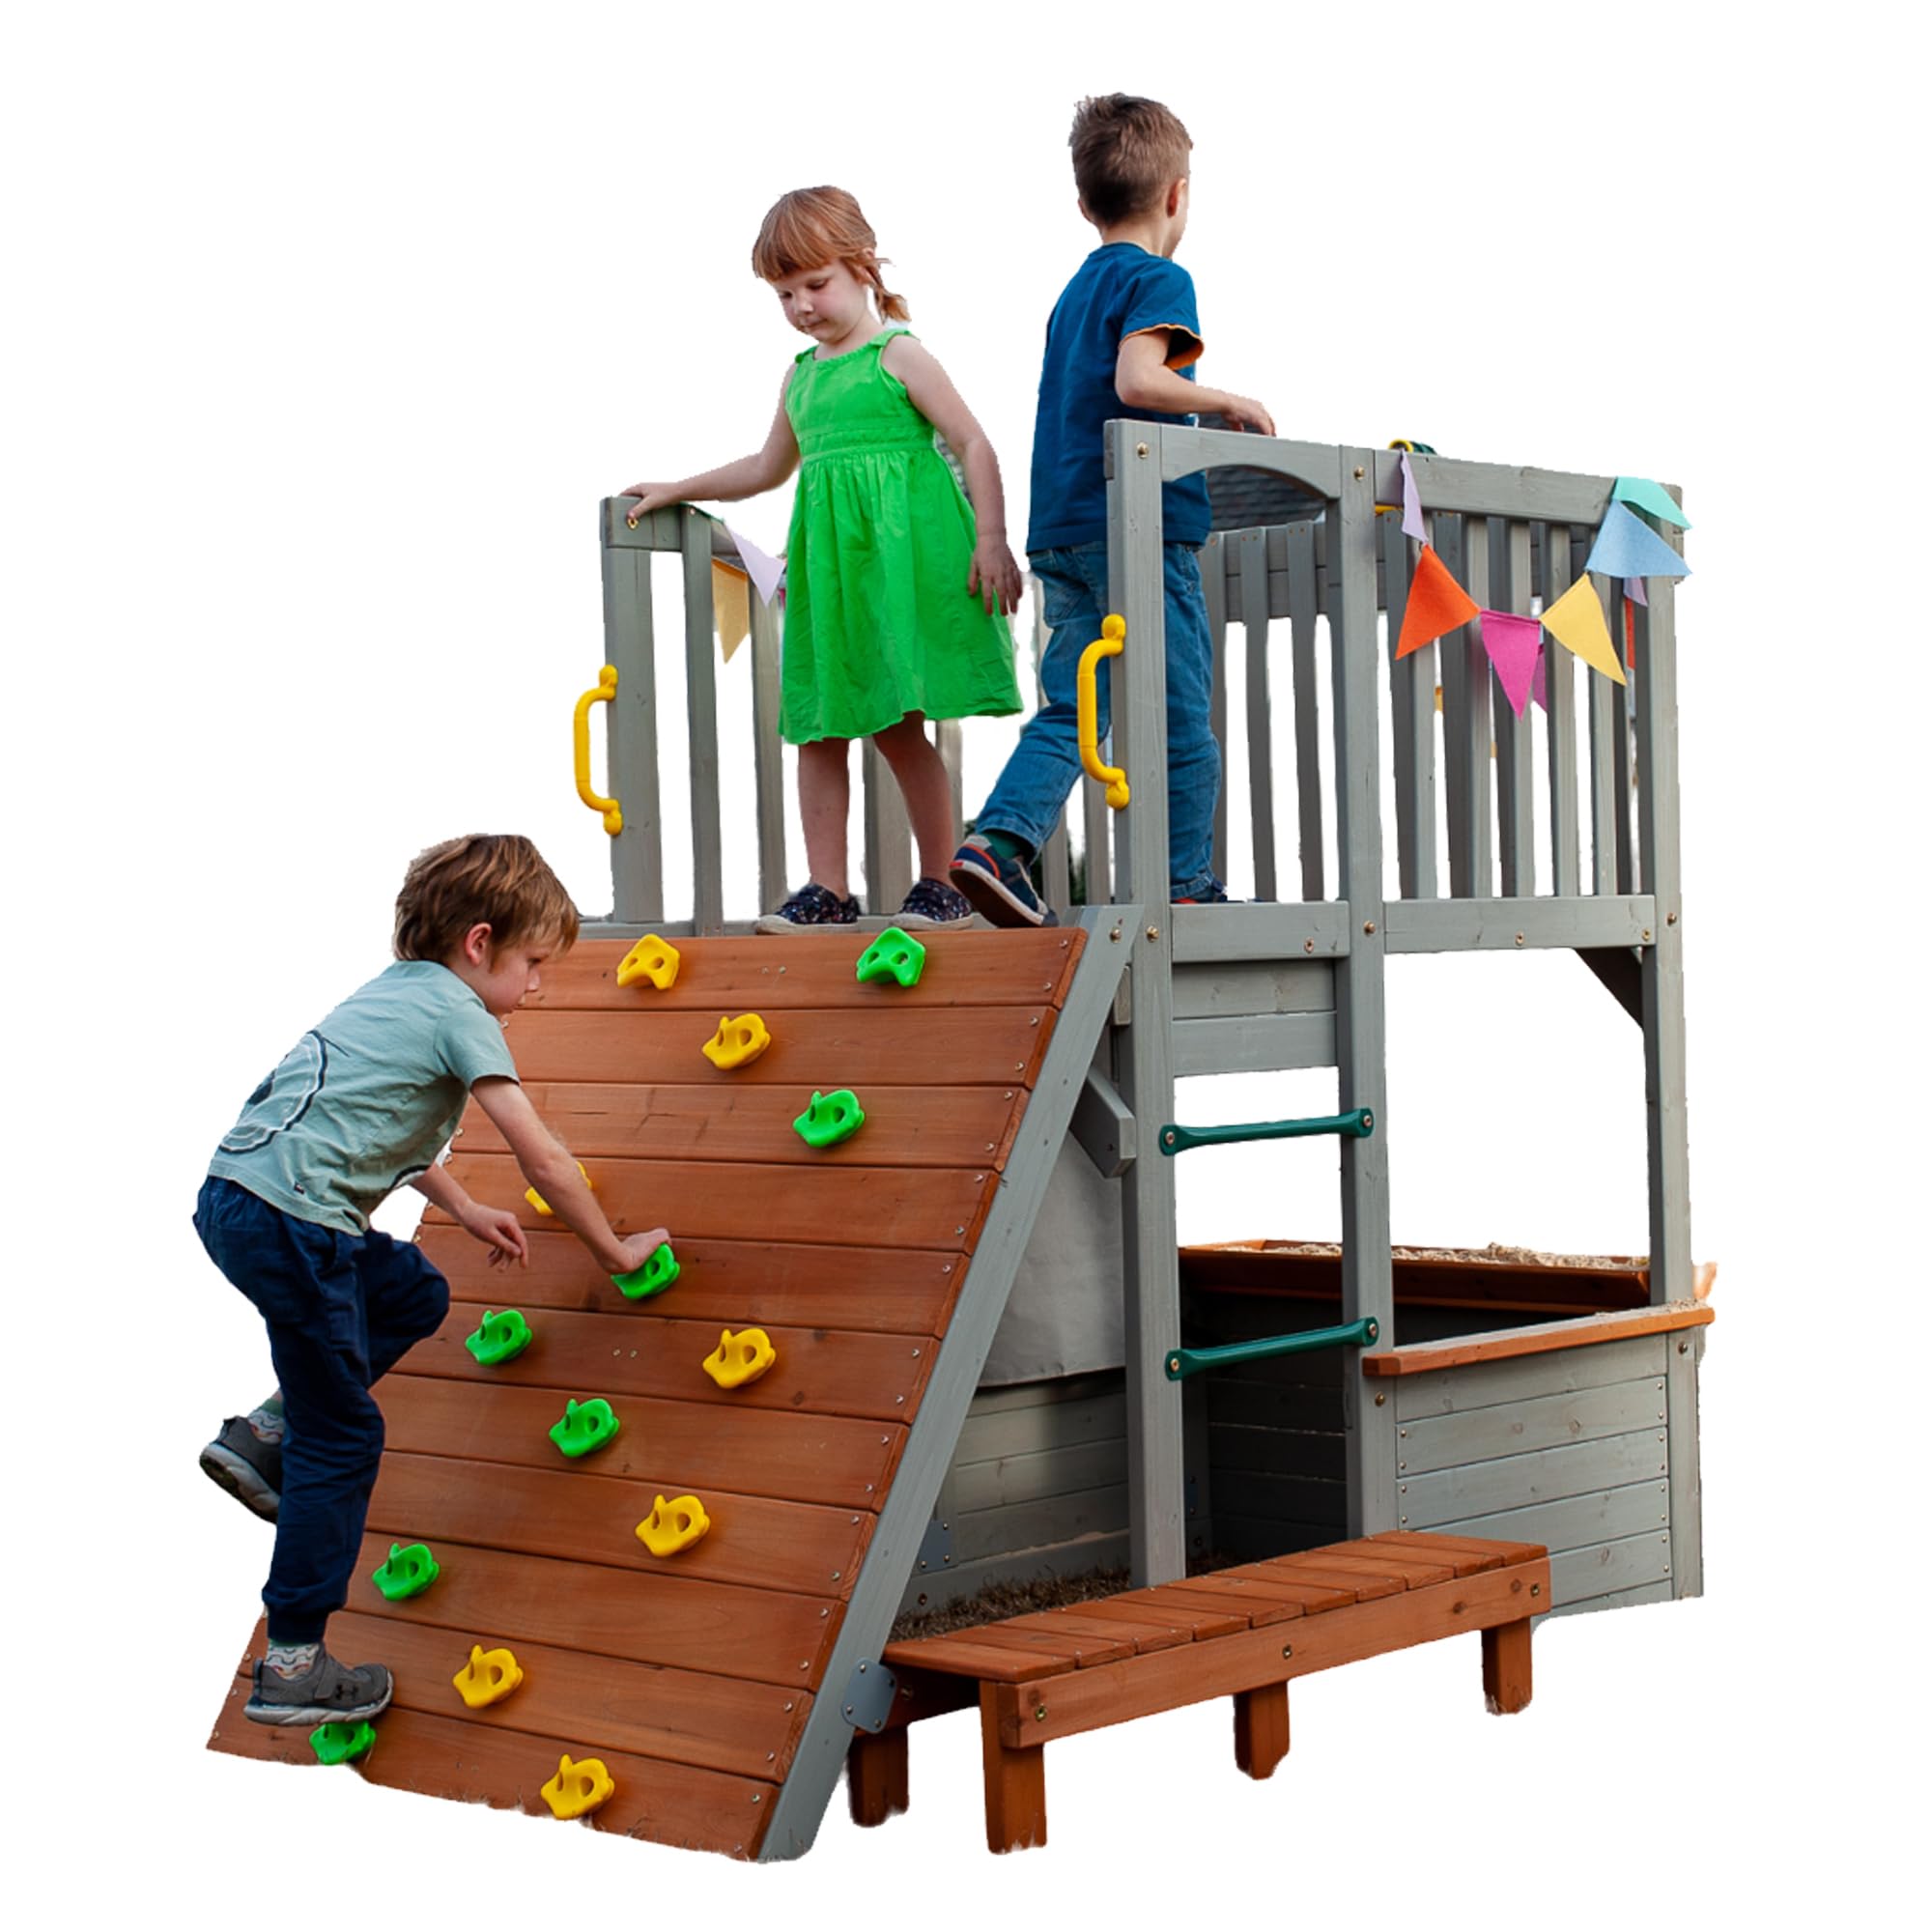 Large Playhouse for Kids Outdoor - Funphix Wooden Playhouse with Sandbox, Bench, Play Telescope, Ladder, Climbing Ramp & Doors - Durable 2 Levels Lookout Post Outdoor Playset for Backyard